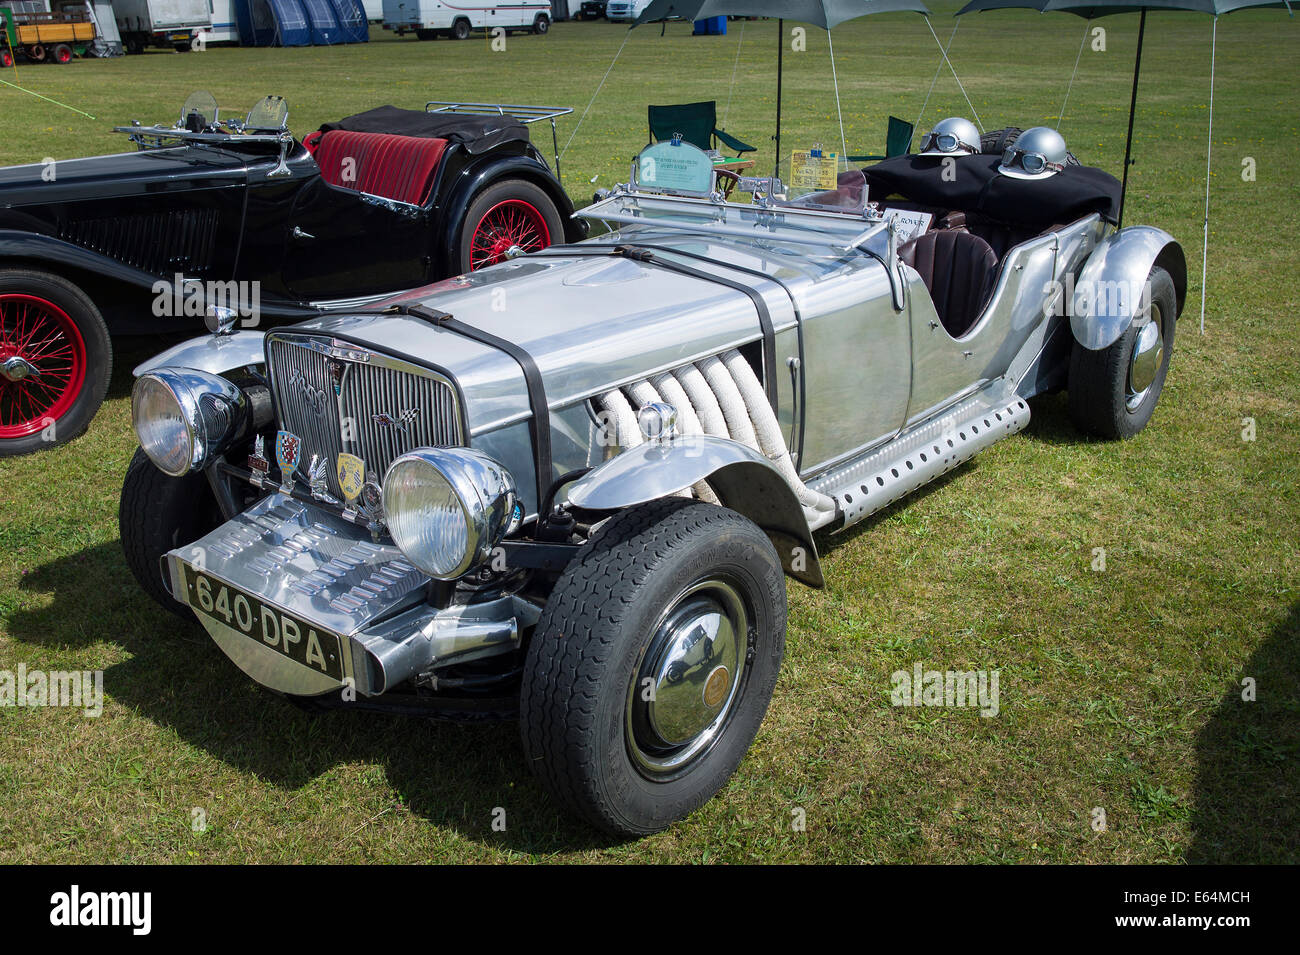 Old 1950s Rover P4 105S sports car at a show Stock Photo